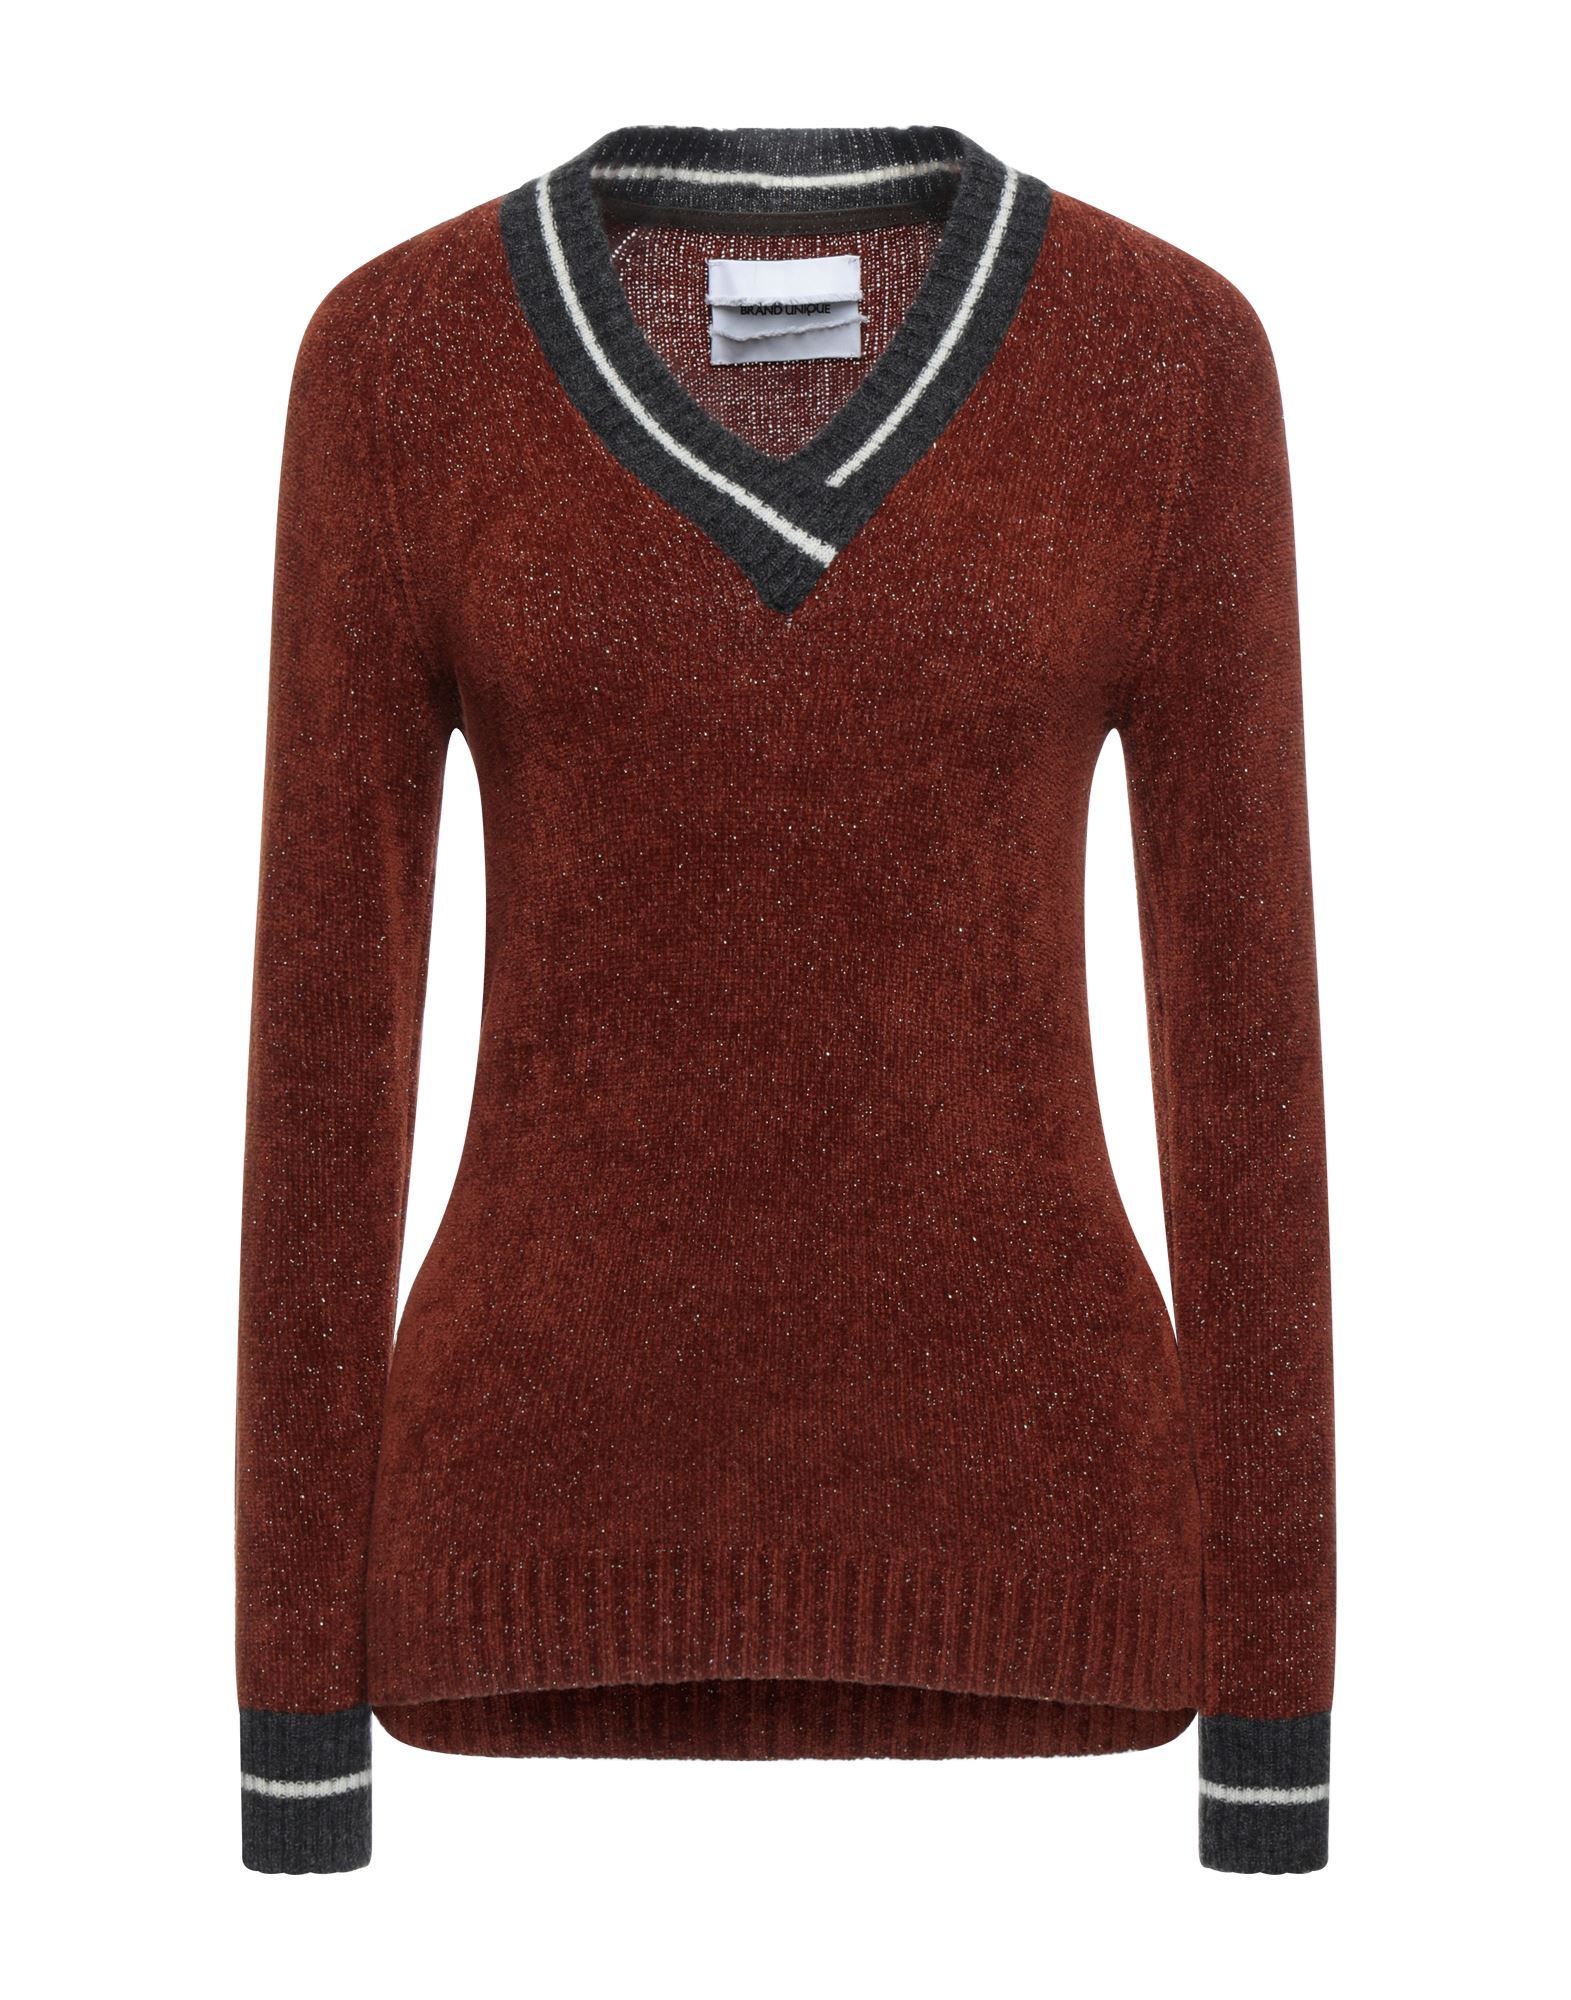 Shop Brand Unique Woman Sweater Brown Size 1 Viscose, Polyester, Polyamide